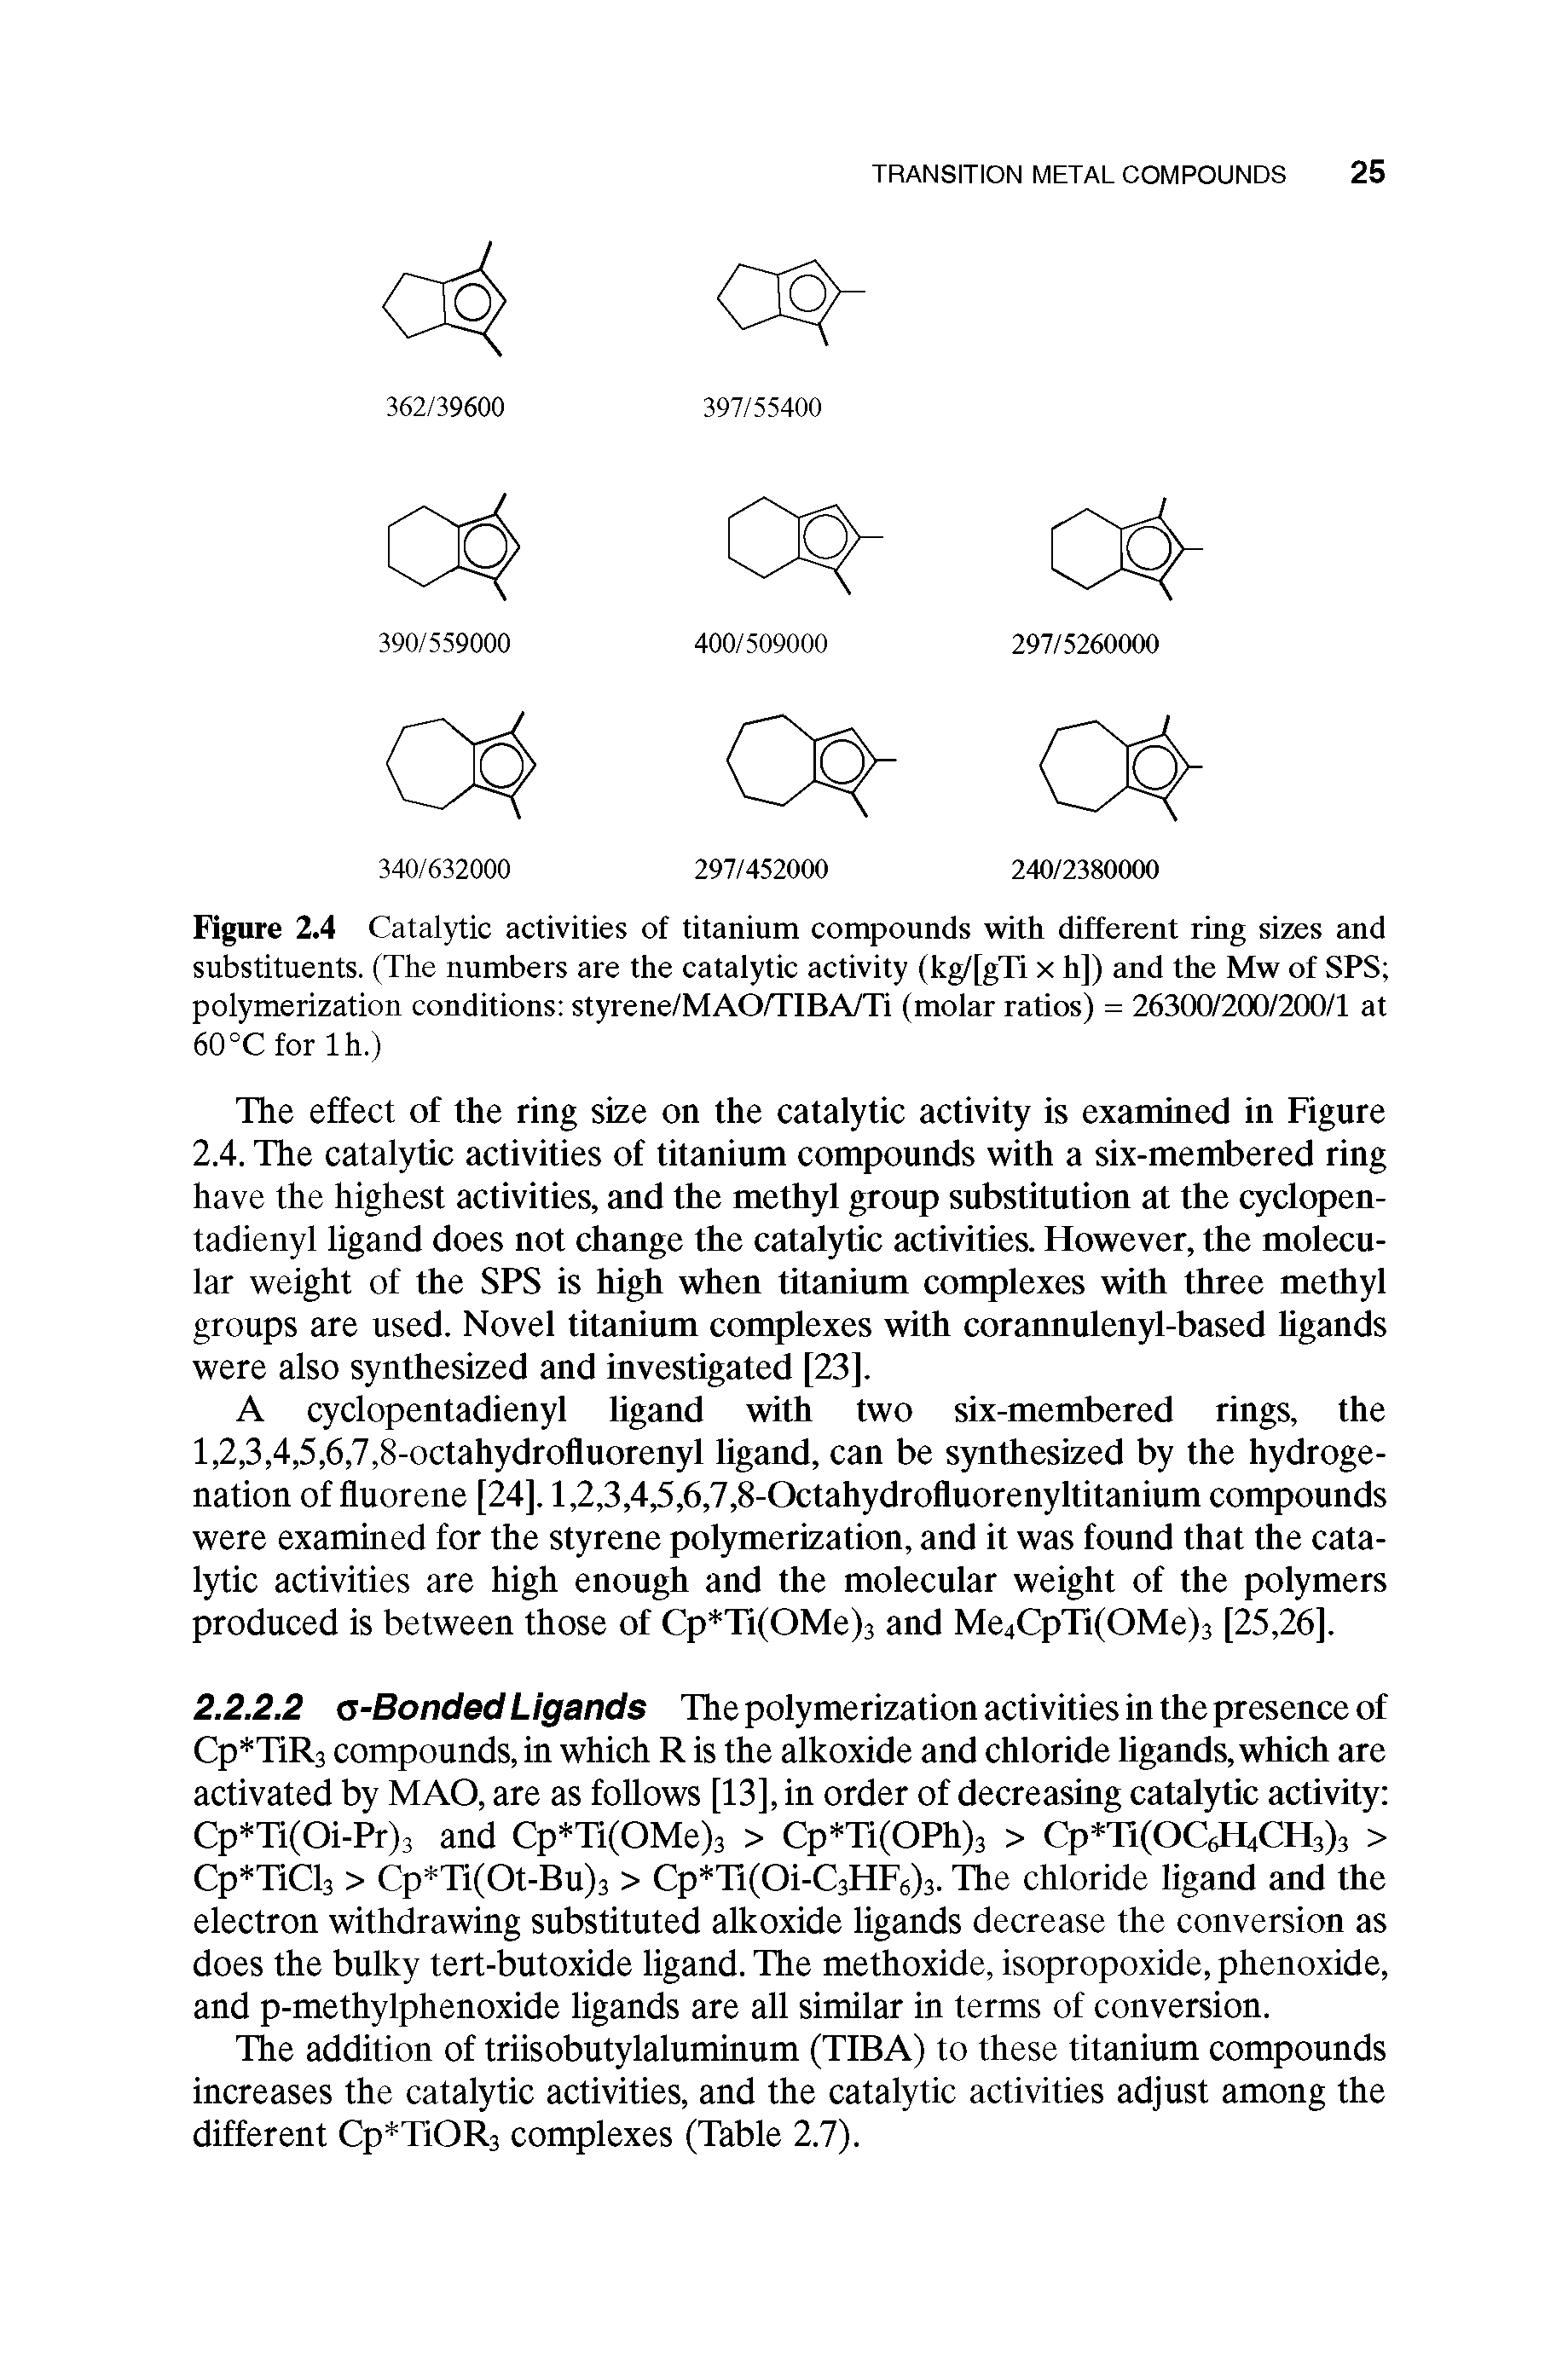 Figure 2.4 Catalytic activities of titanium compounds with different ring sizes and substituents. (The numbers are the catalytic activity (kg/[gTi x h]) and the Mw of SPS polymerization conditions styrene/MAO/TIBA/Ti (molar ratios) = 26300/200/200/1 at 60°Cforlh.)...